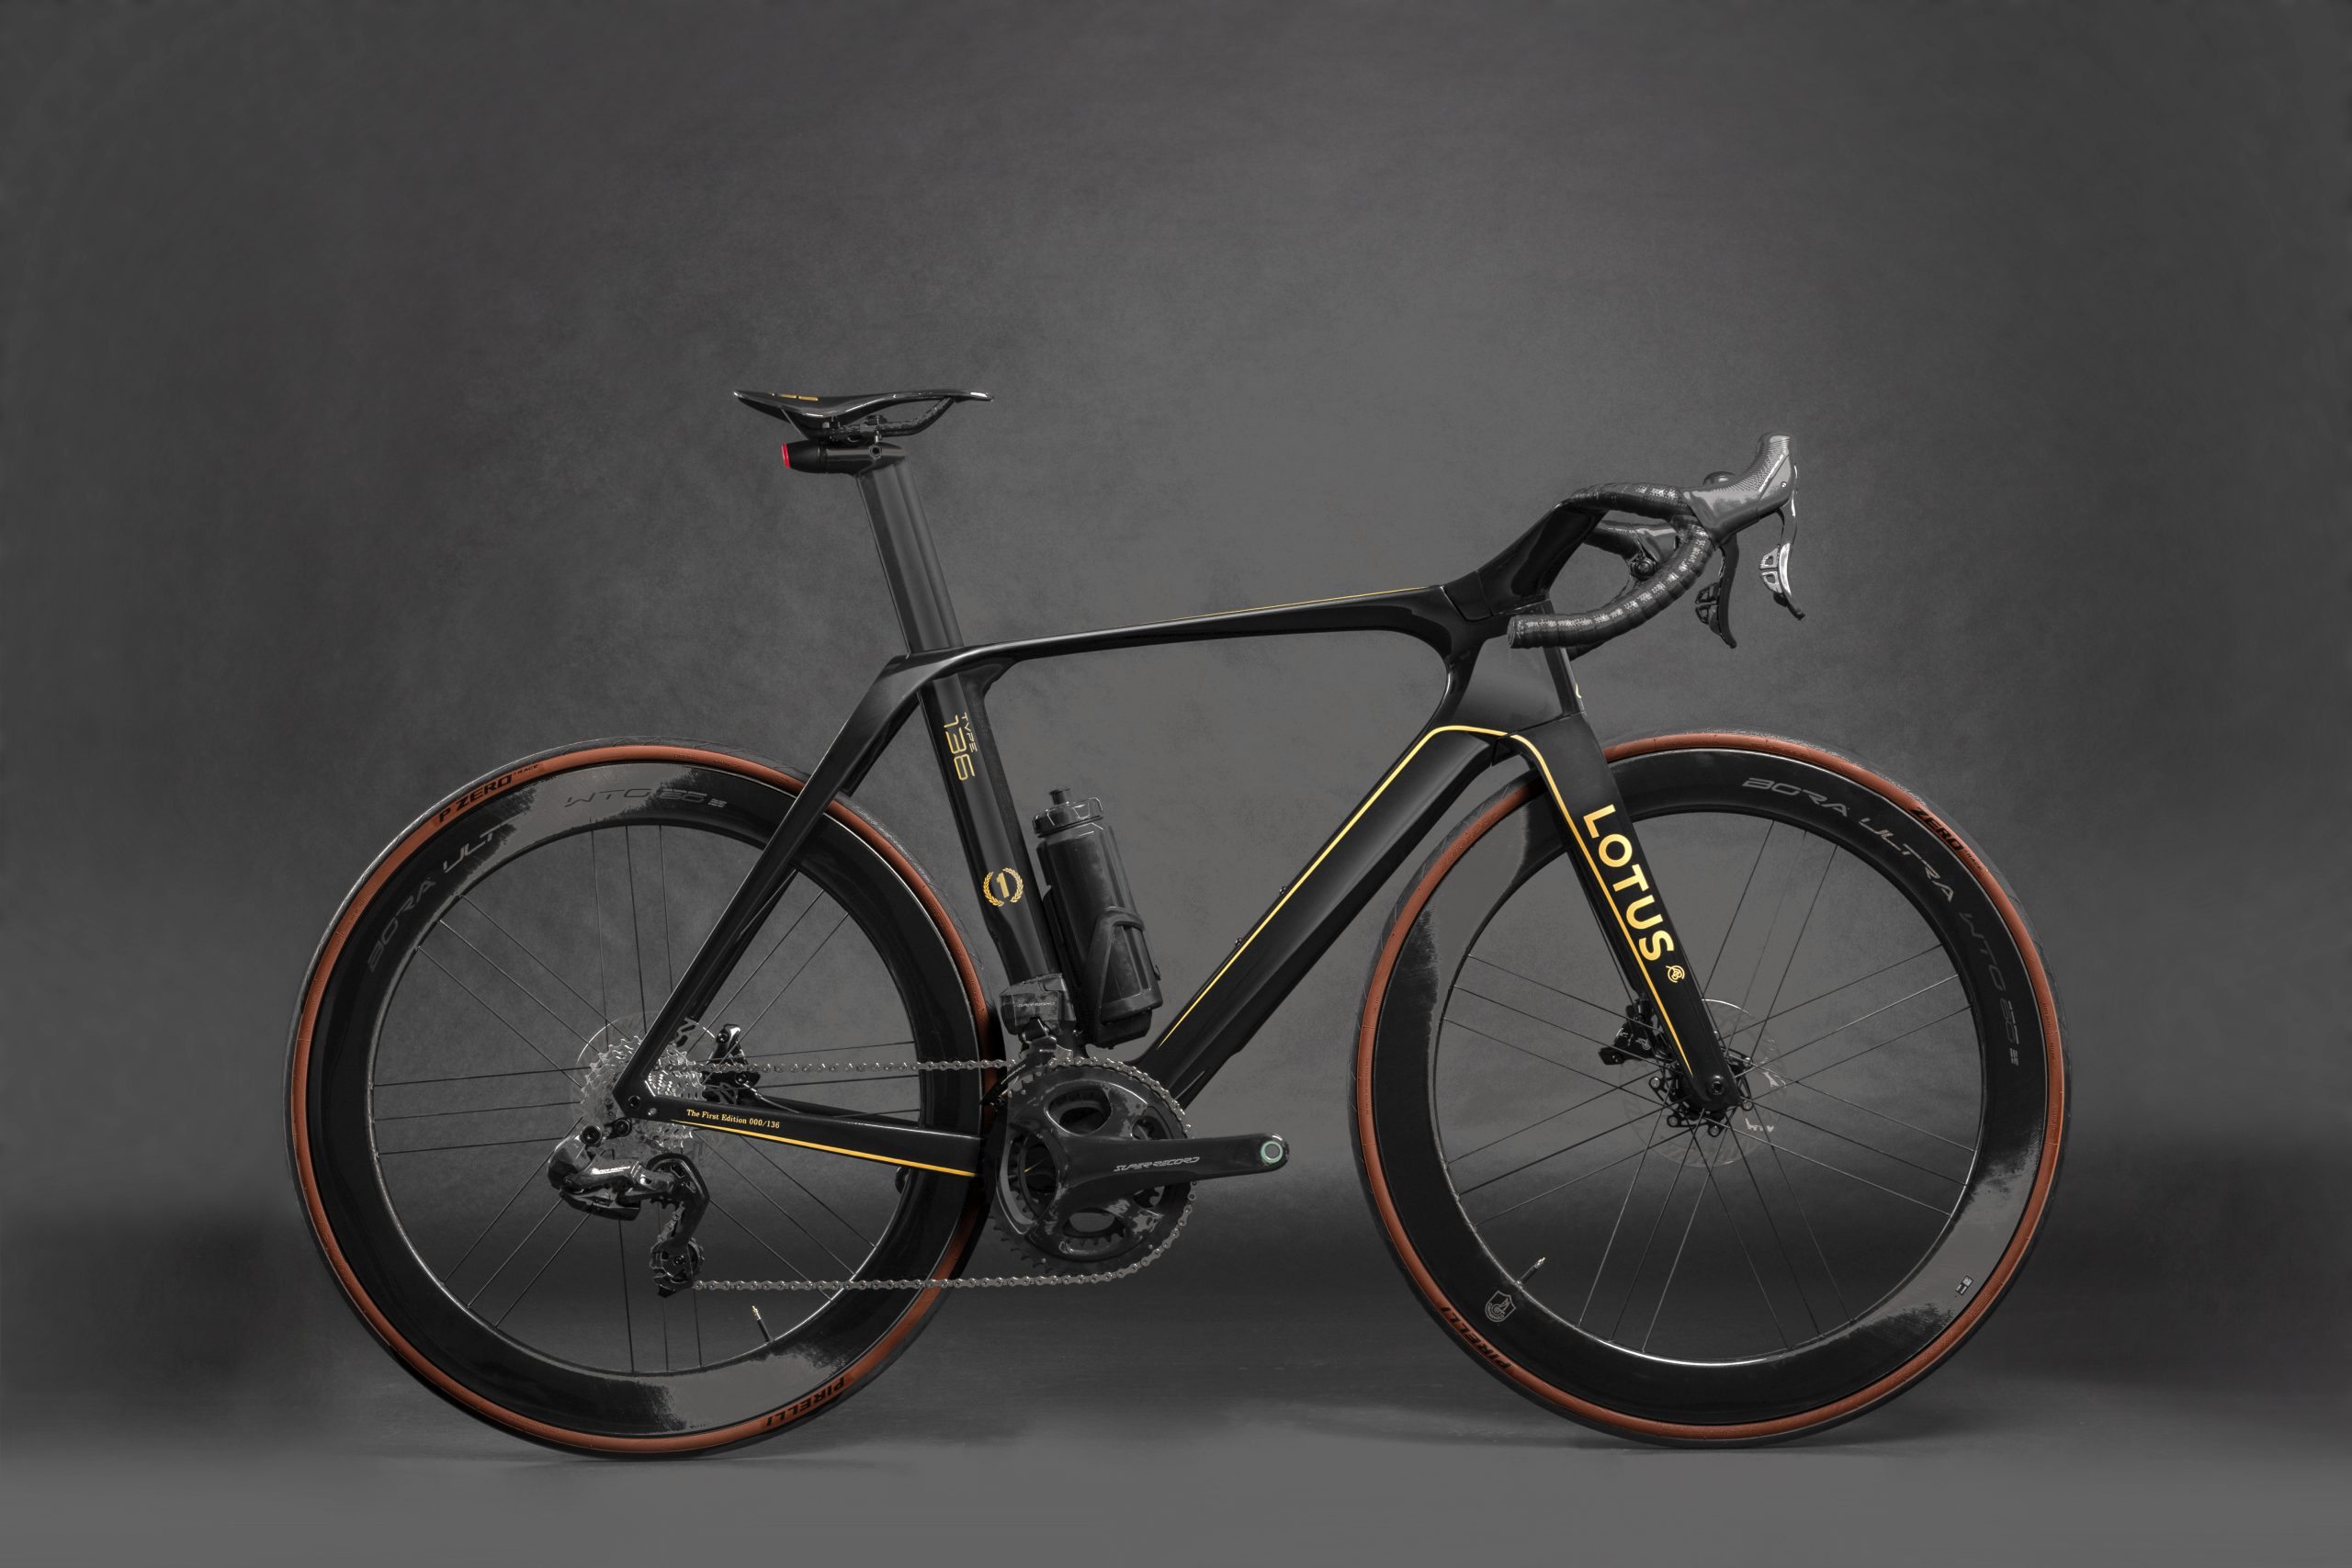 Lotus takes to two wheels with £20,000 electric bike